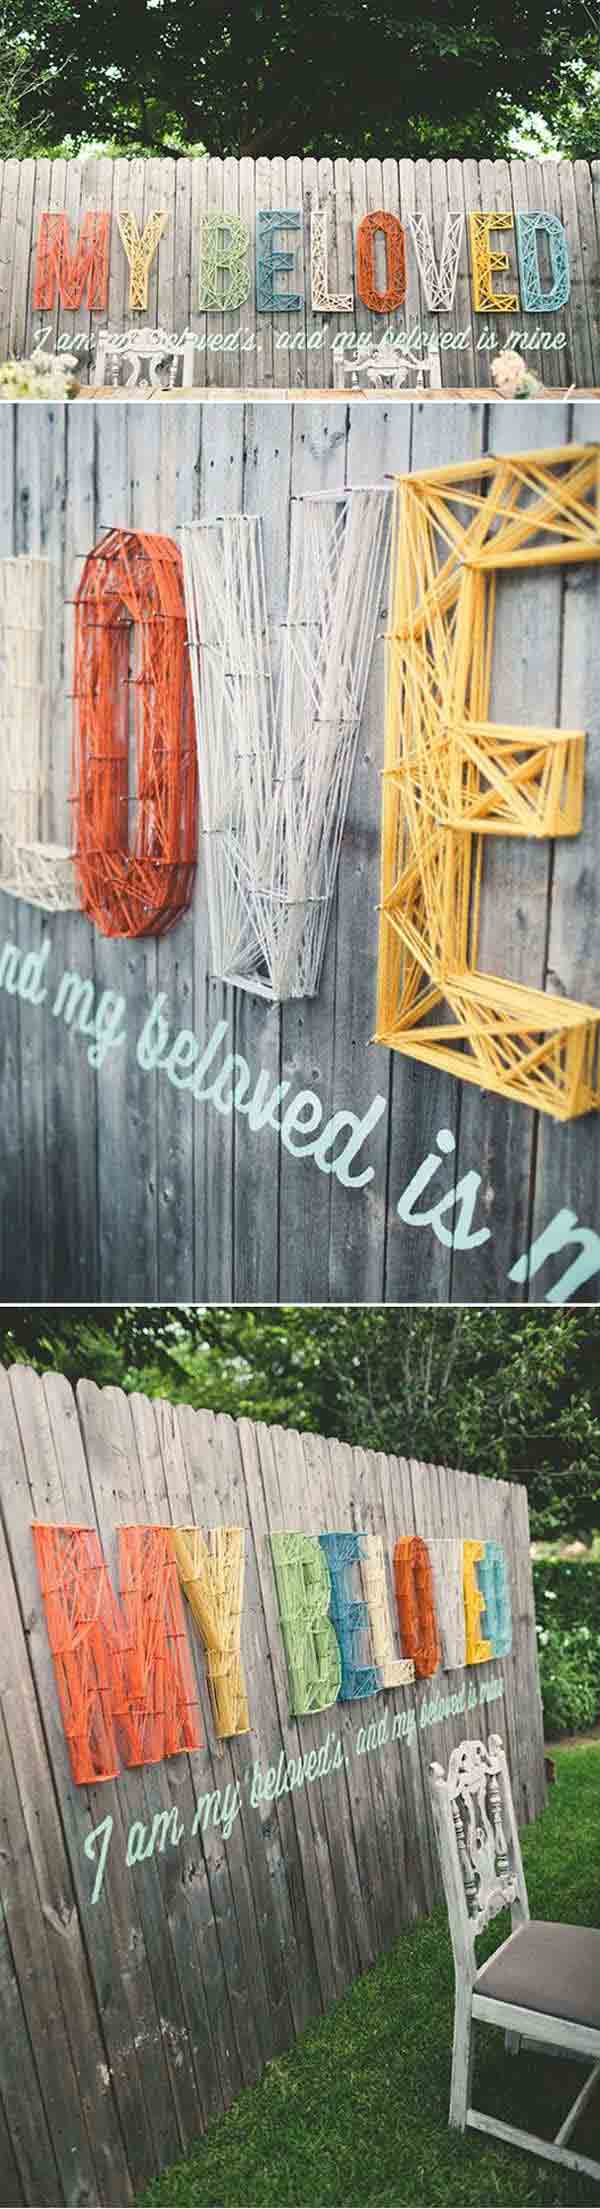 34 Easy and Cheap DIY Art Projects to Beautify Your Backyard Lanscape homesthetics decor (26)